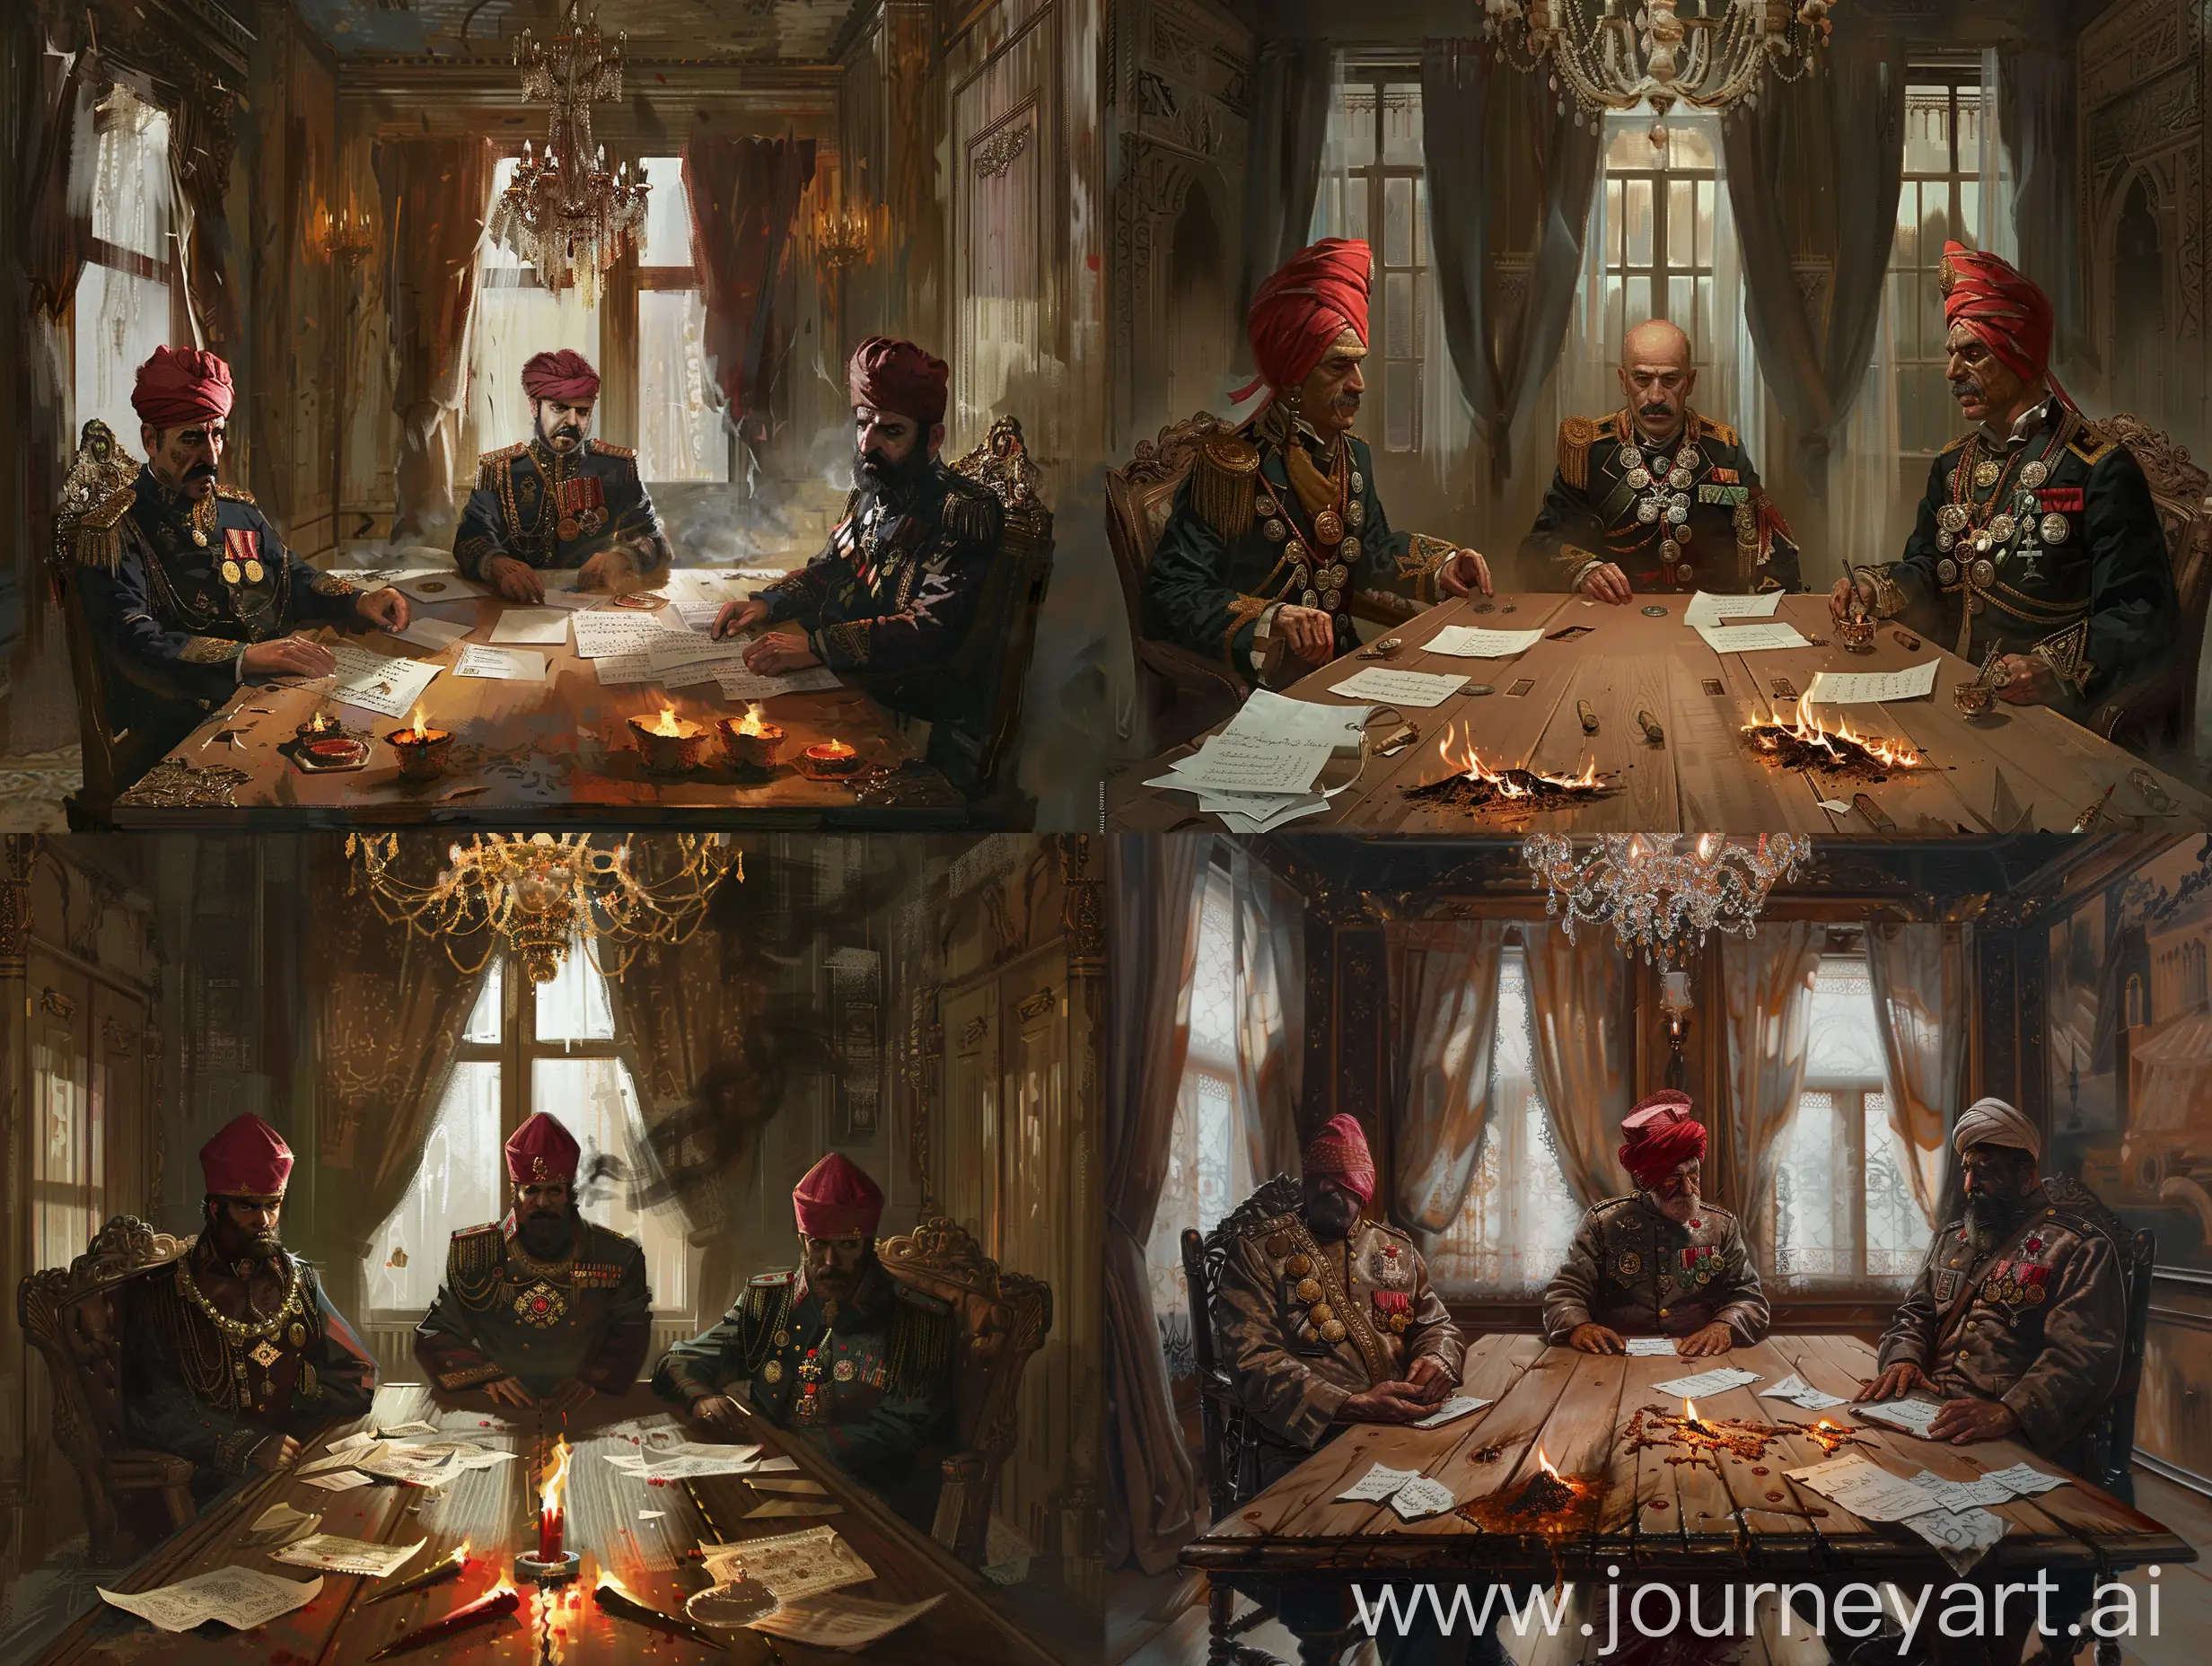 Ottoman-Pashas-in-Military-Uniforms-Gathered-around-Wooden-Table